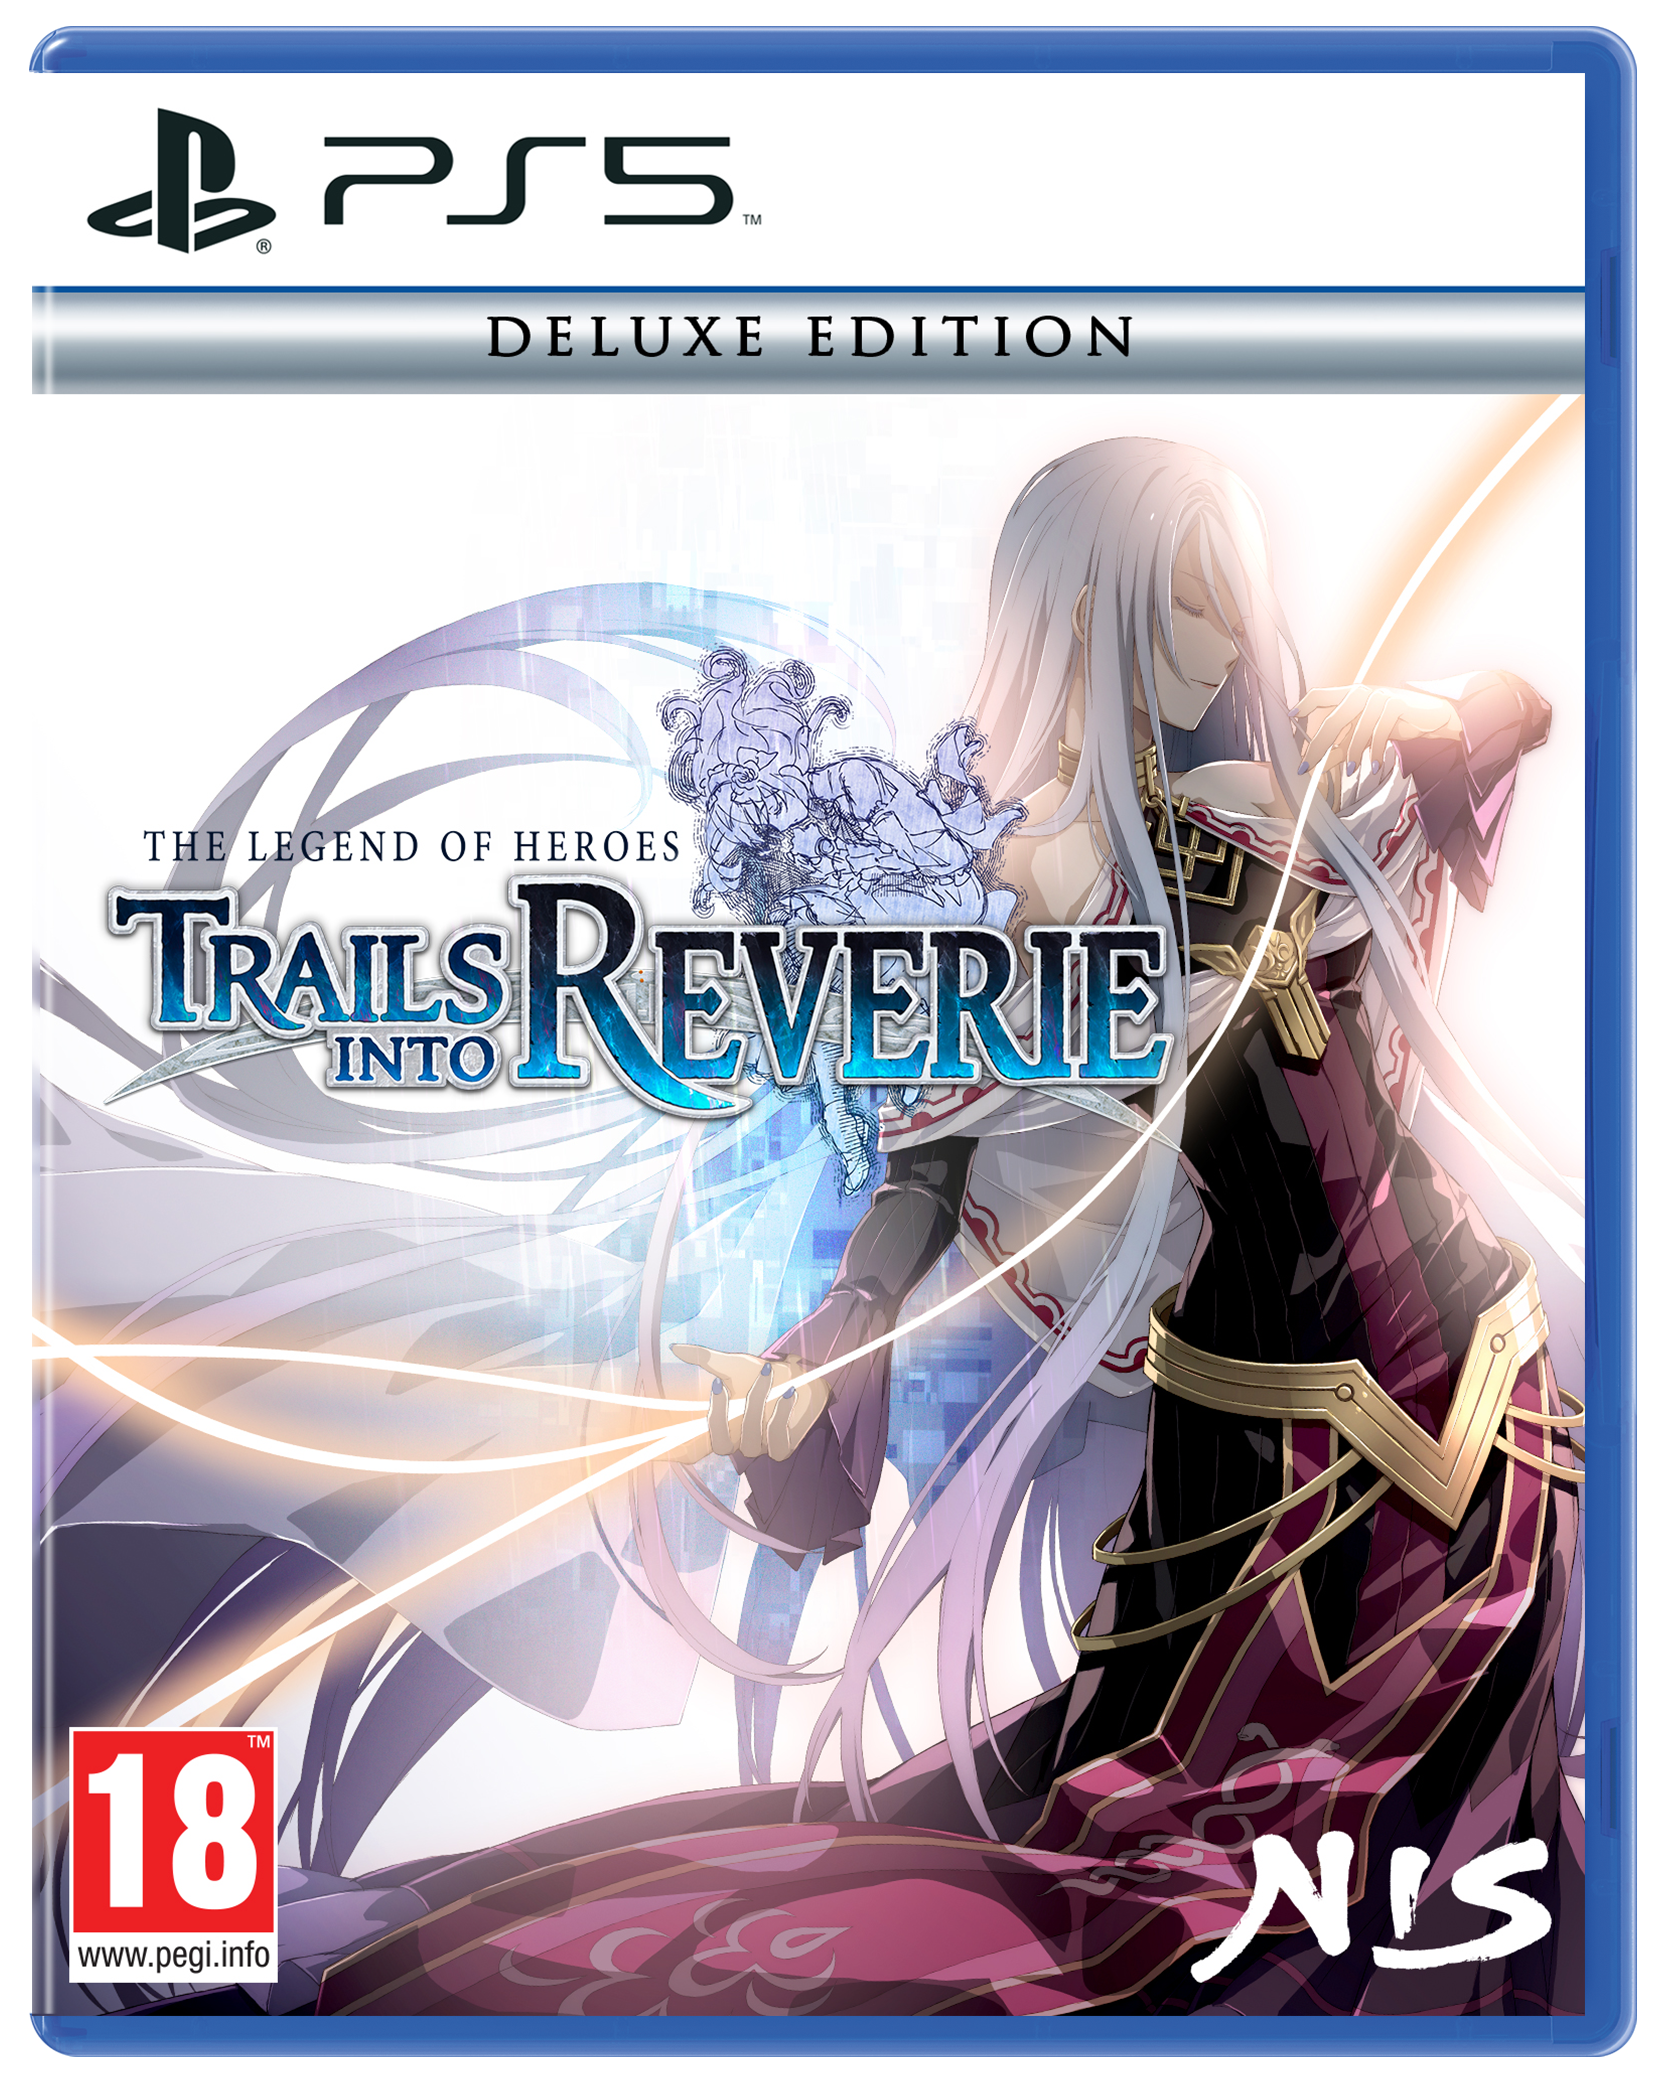 The Legend of Heroes: Trails into Reverie - Deluxe Edition - PS5®